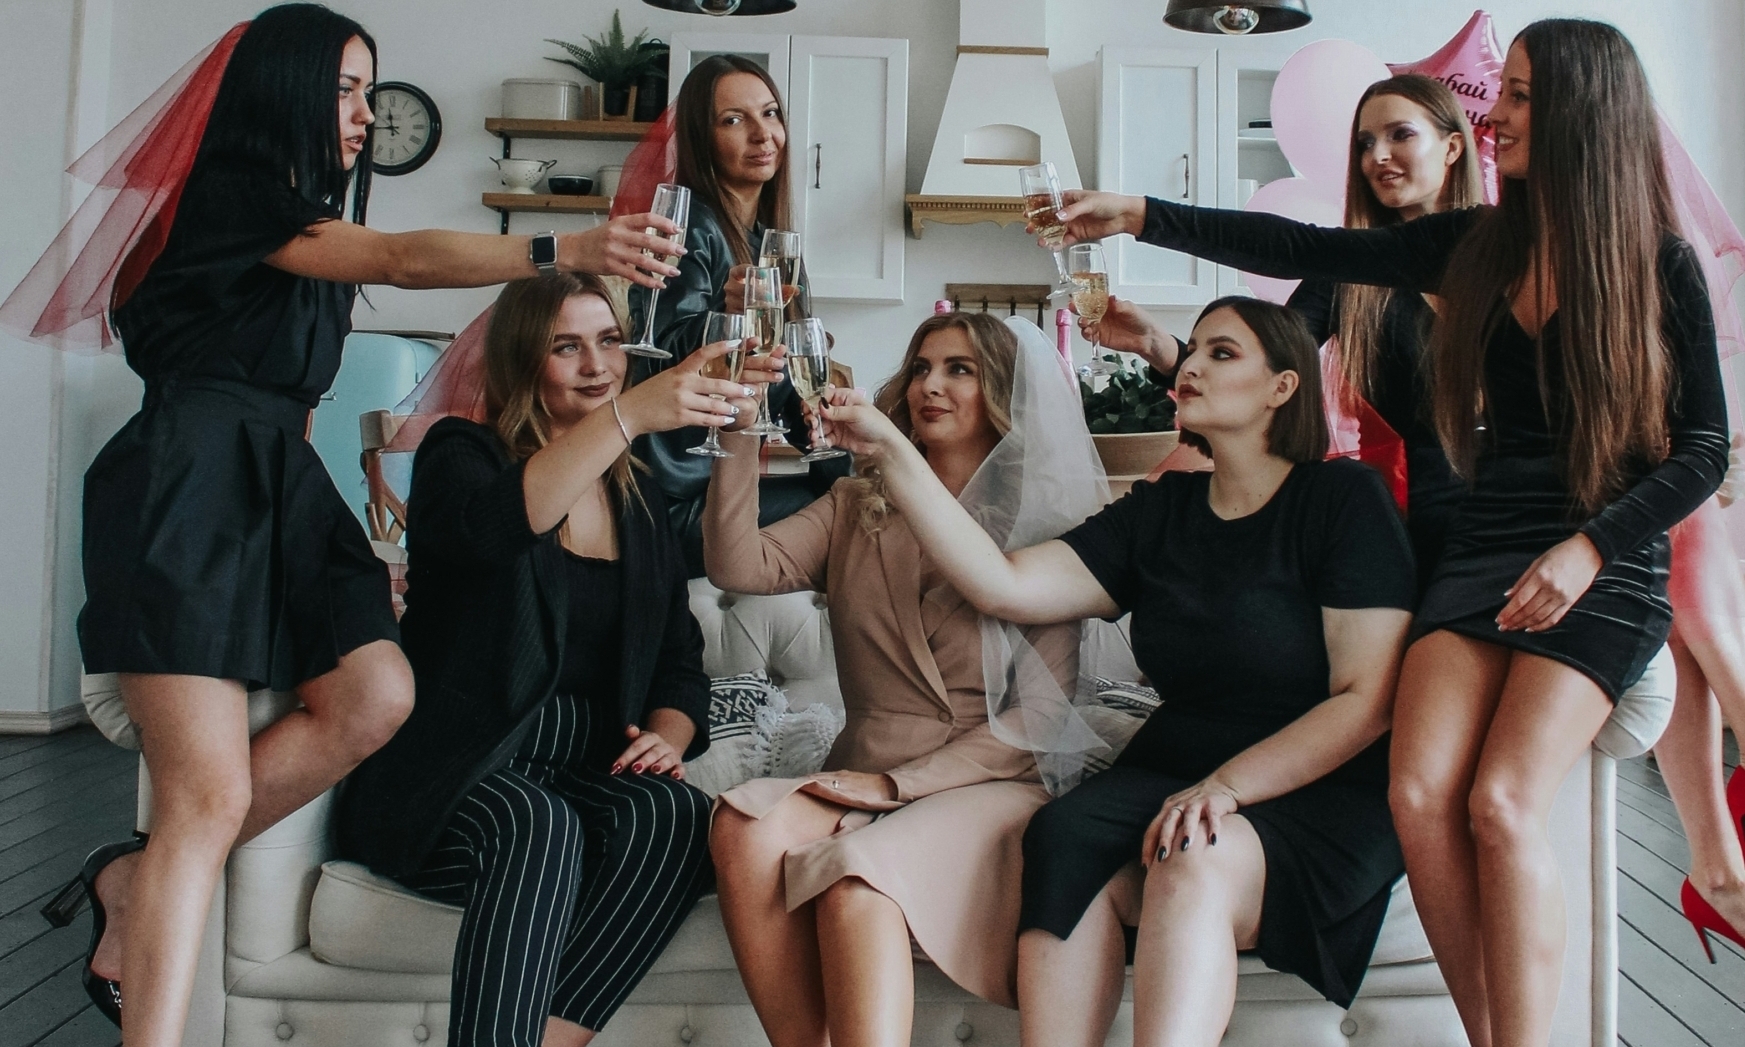 Affordable hen party ideas